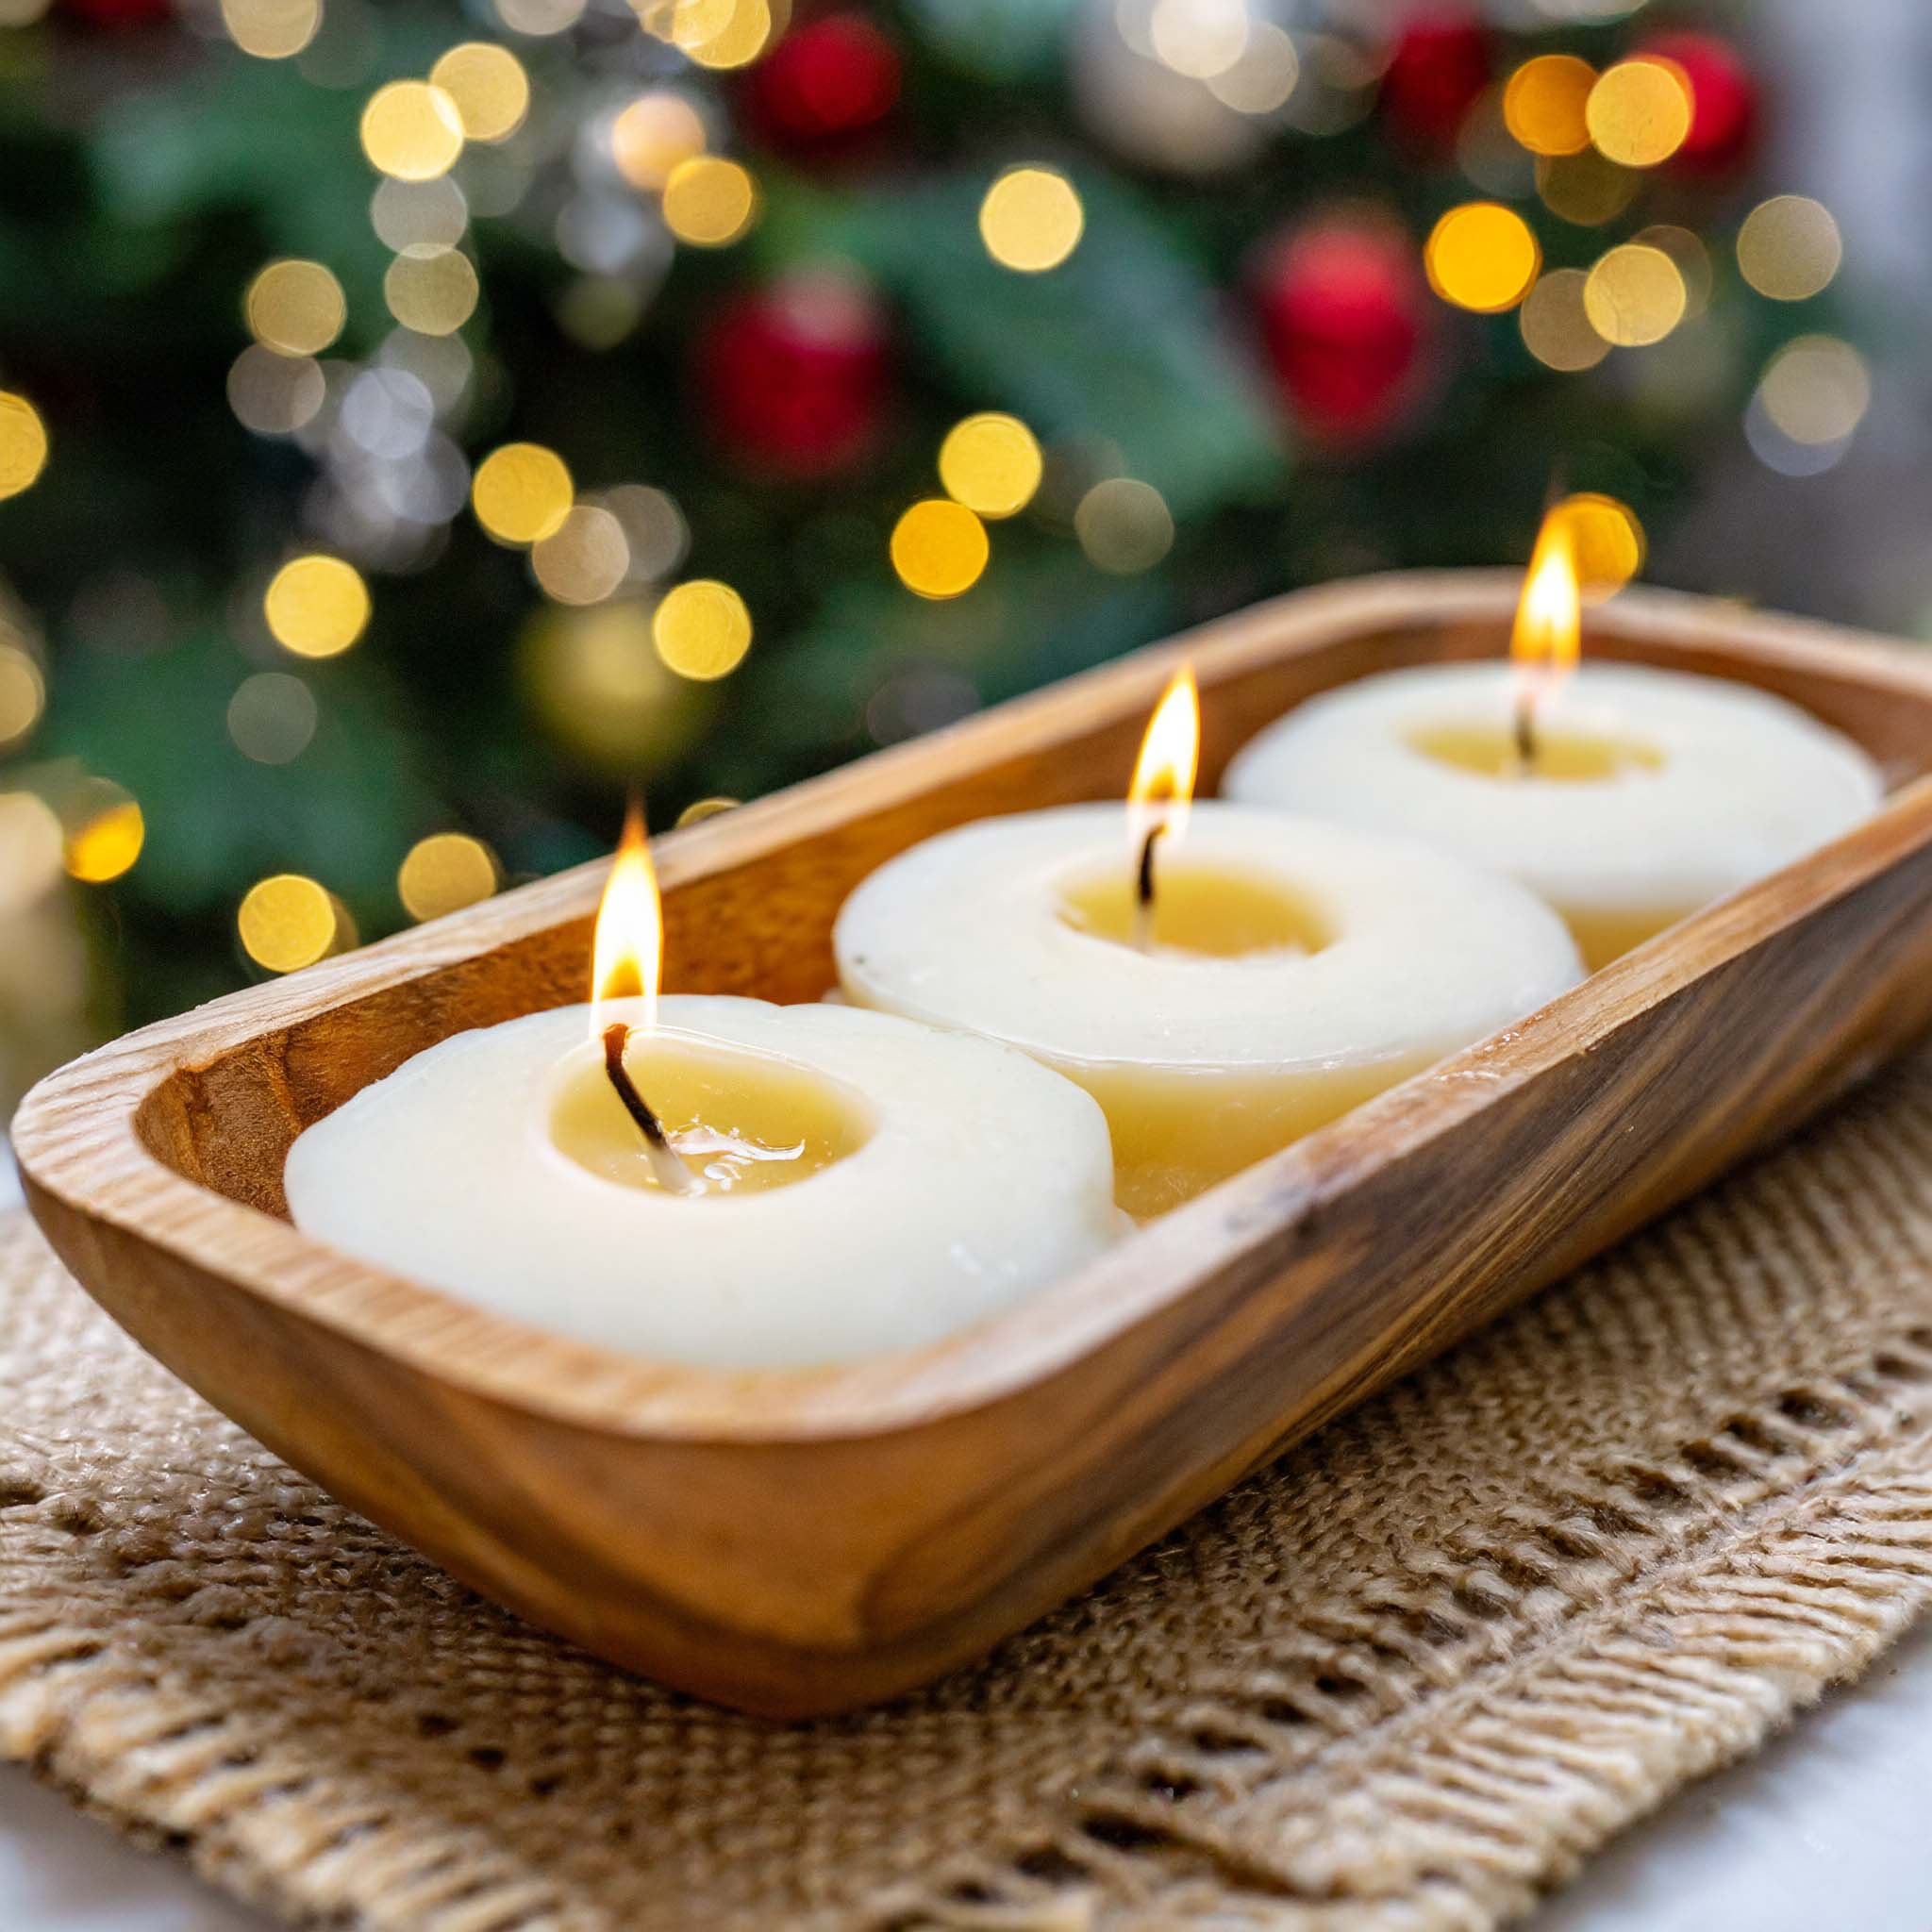 Wooden dough bowl candle with holiday lights in background.